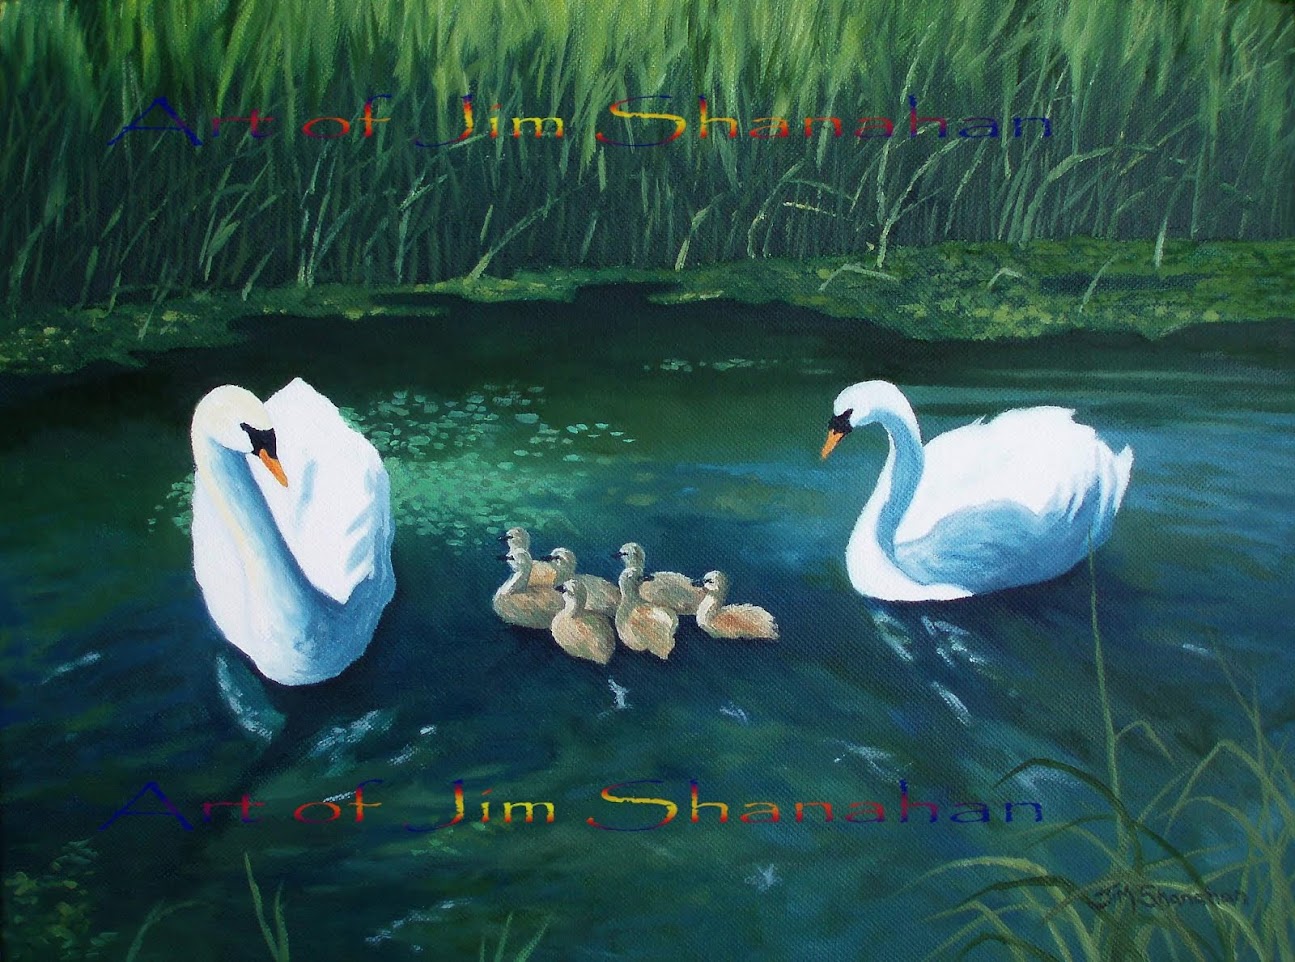 Swans and Cygnets -- For Sale Framed -- Euro 415